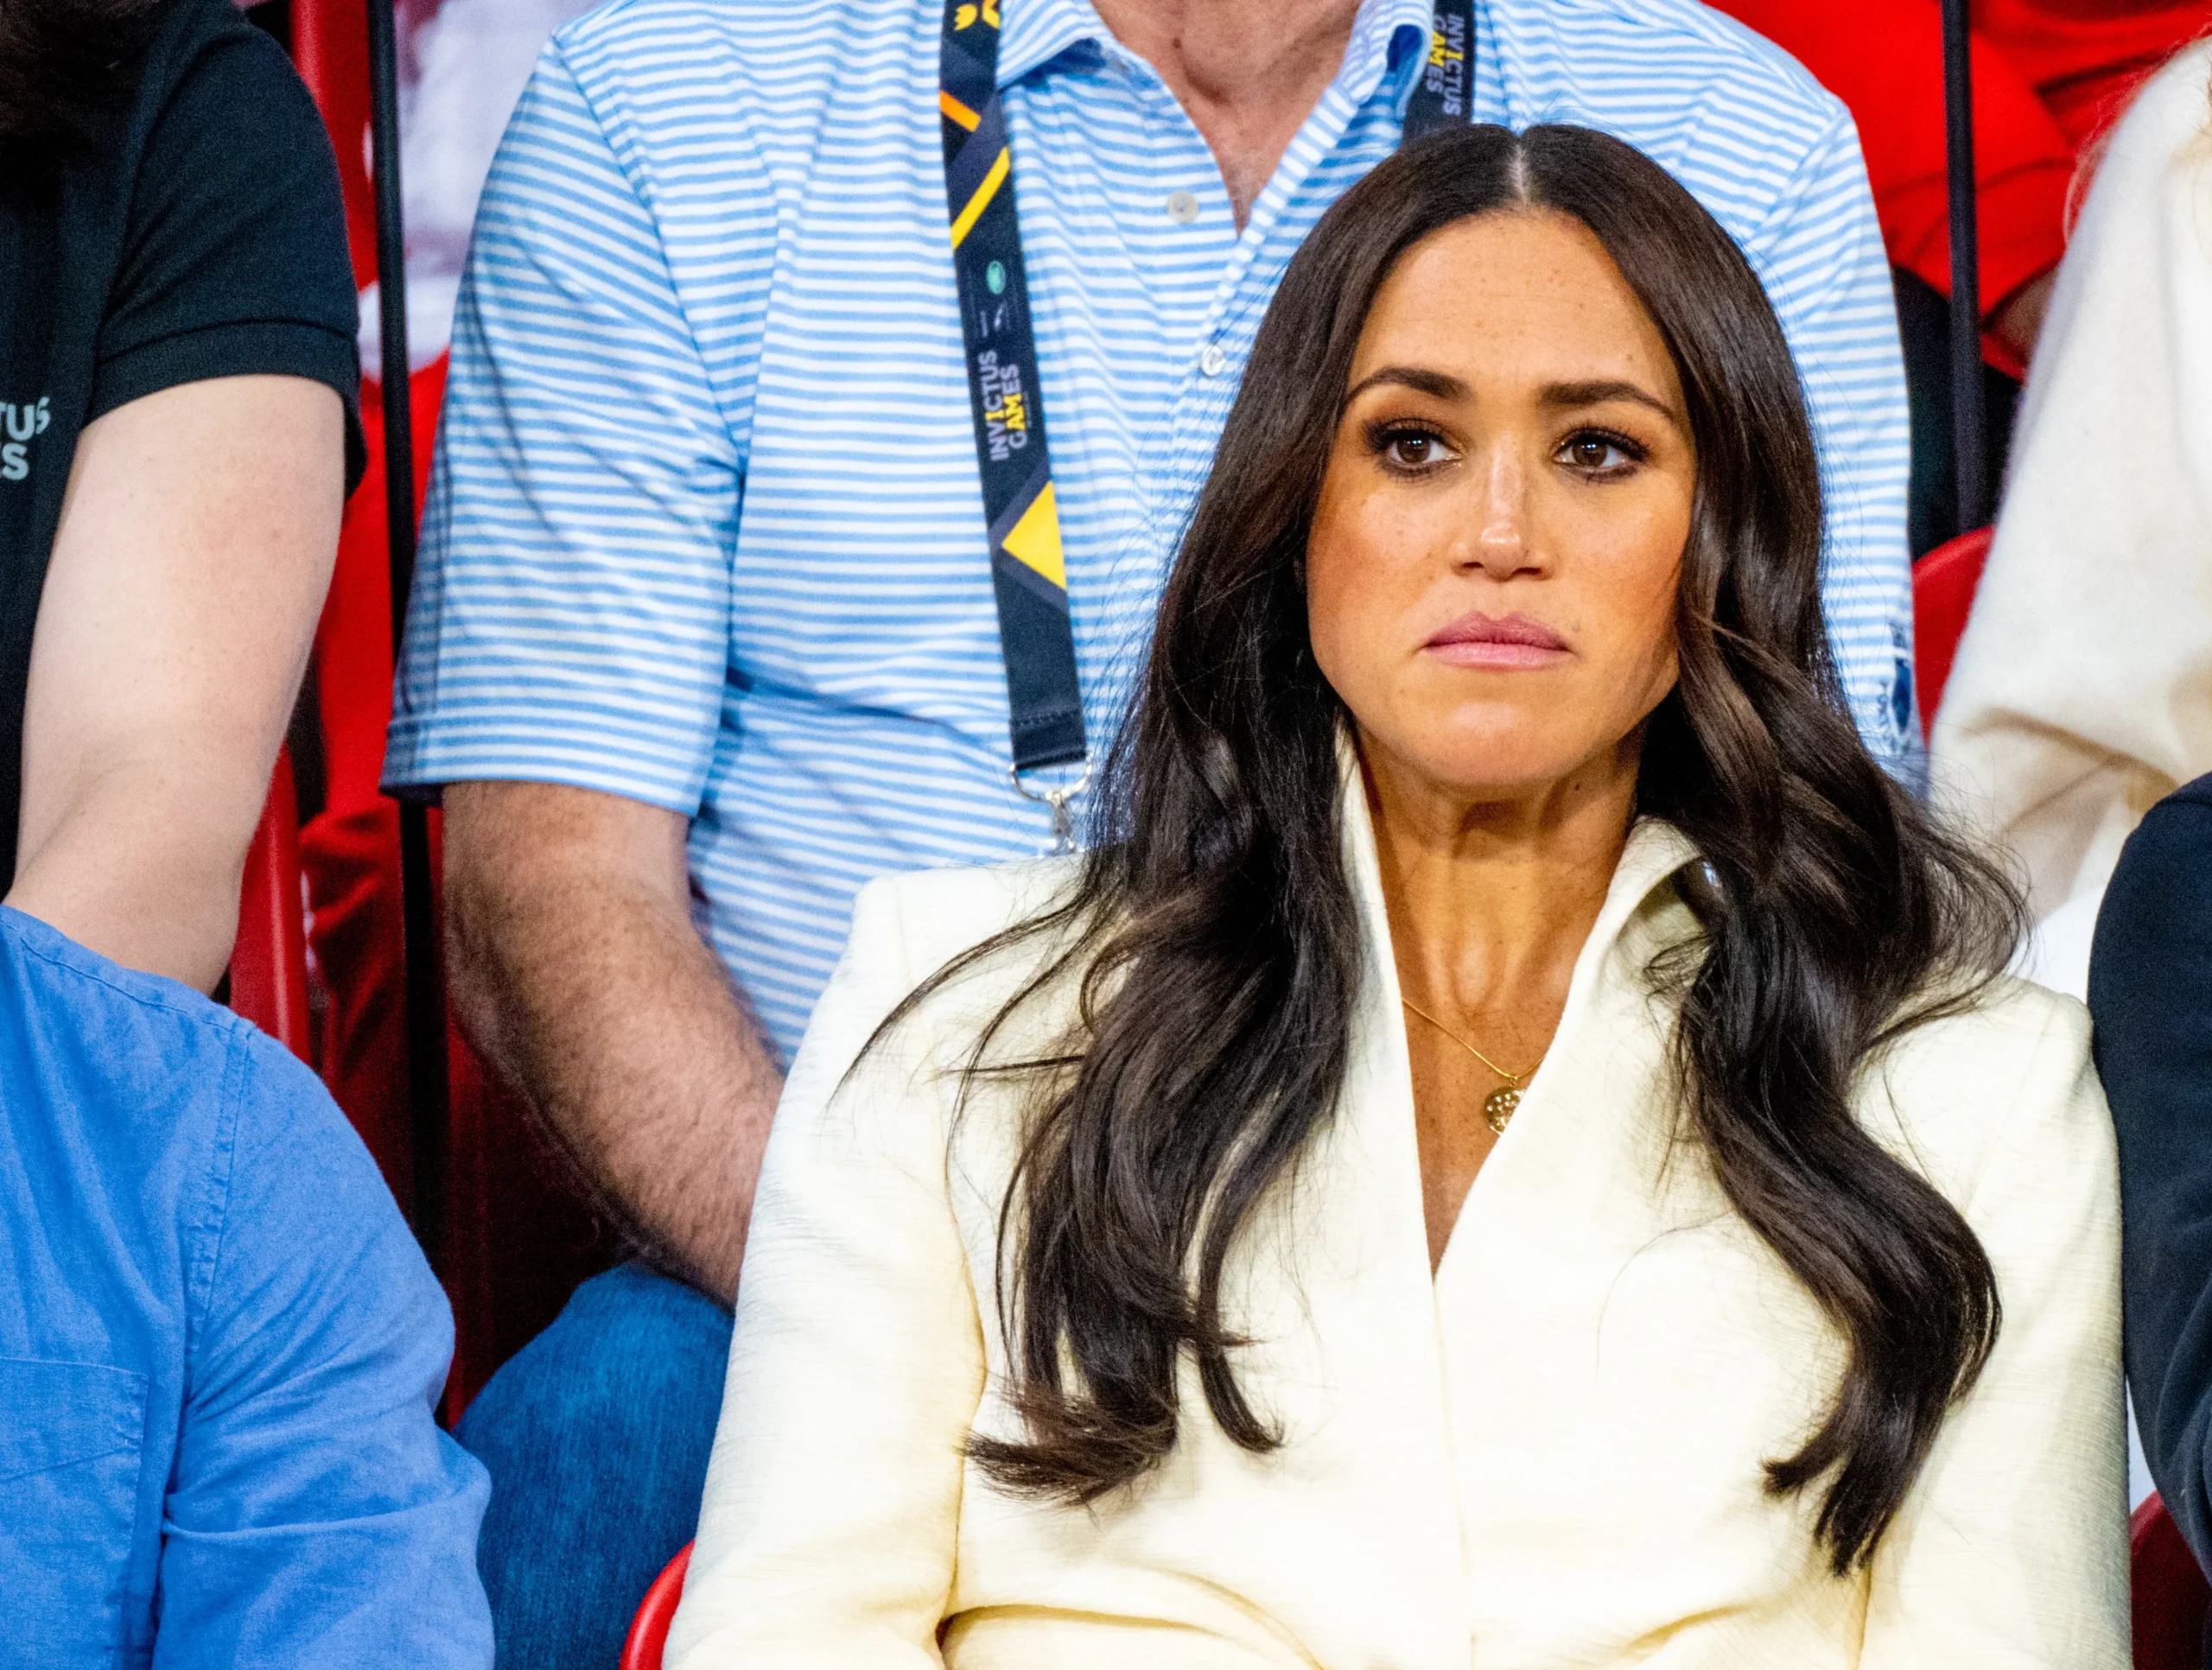 Meghan Markle react to the warning giving to her, as Prince Harry prepares for UK visit.